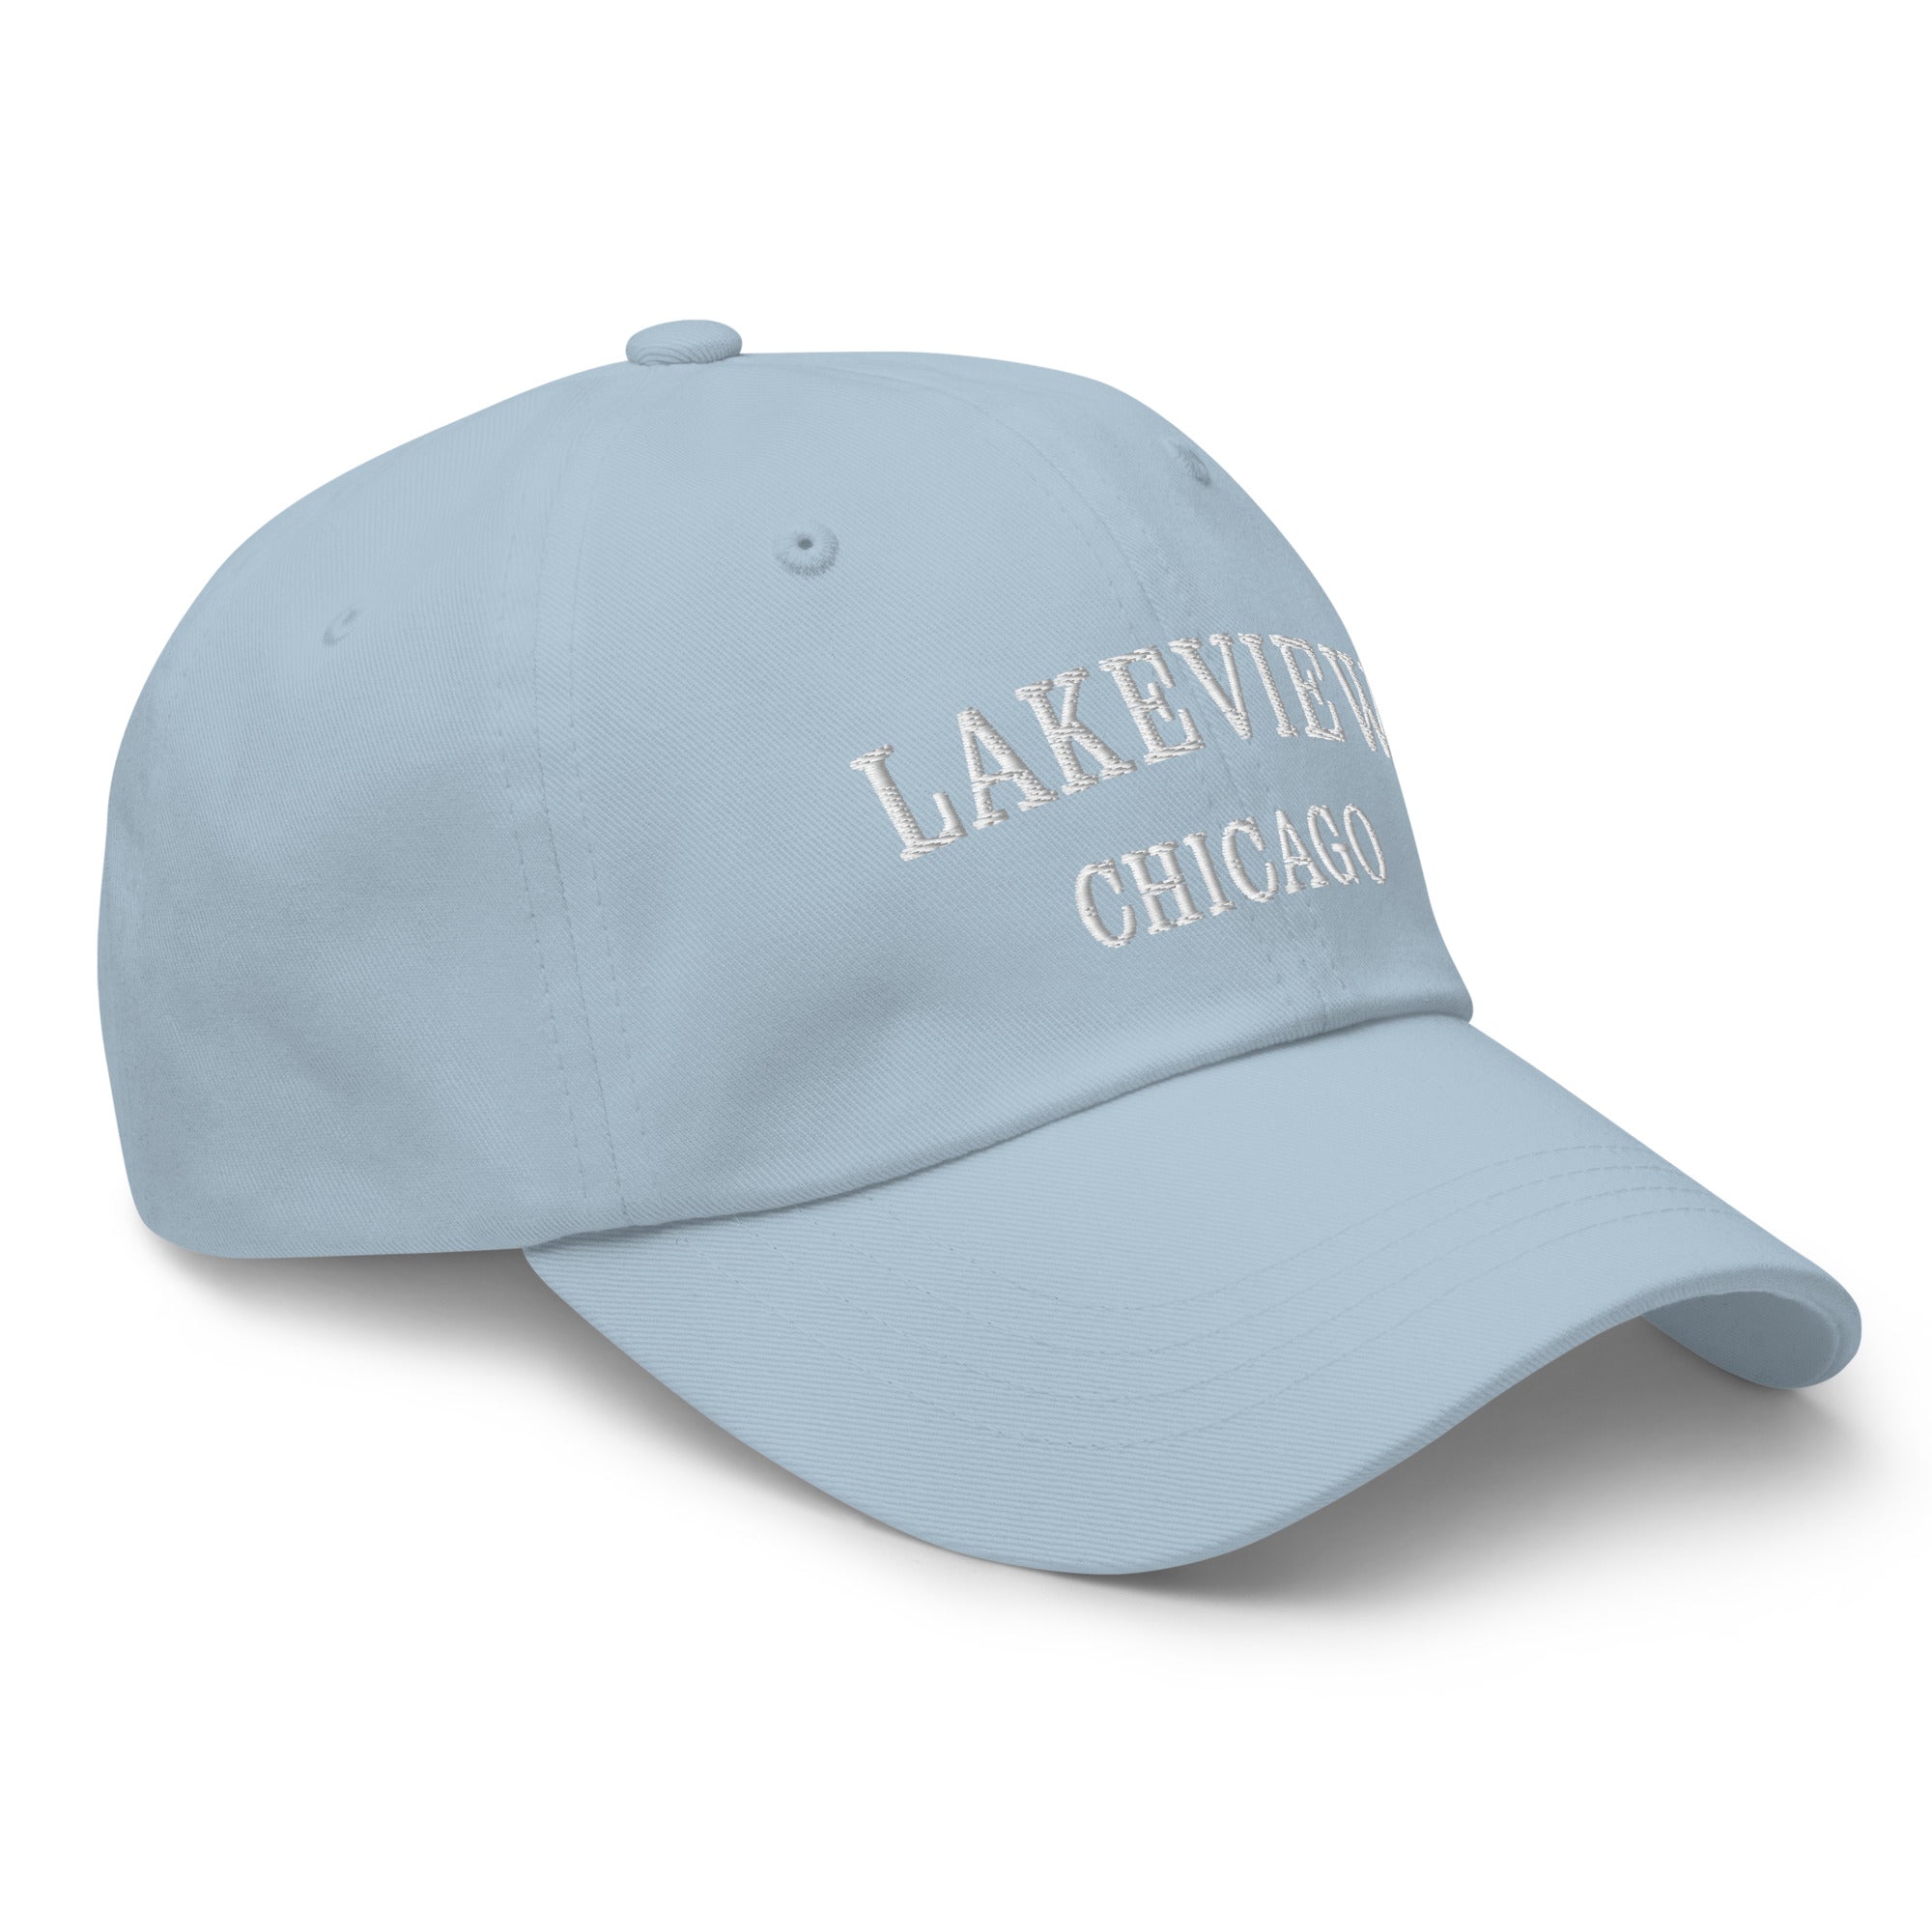 Lakeview Chicago Dad Hat